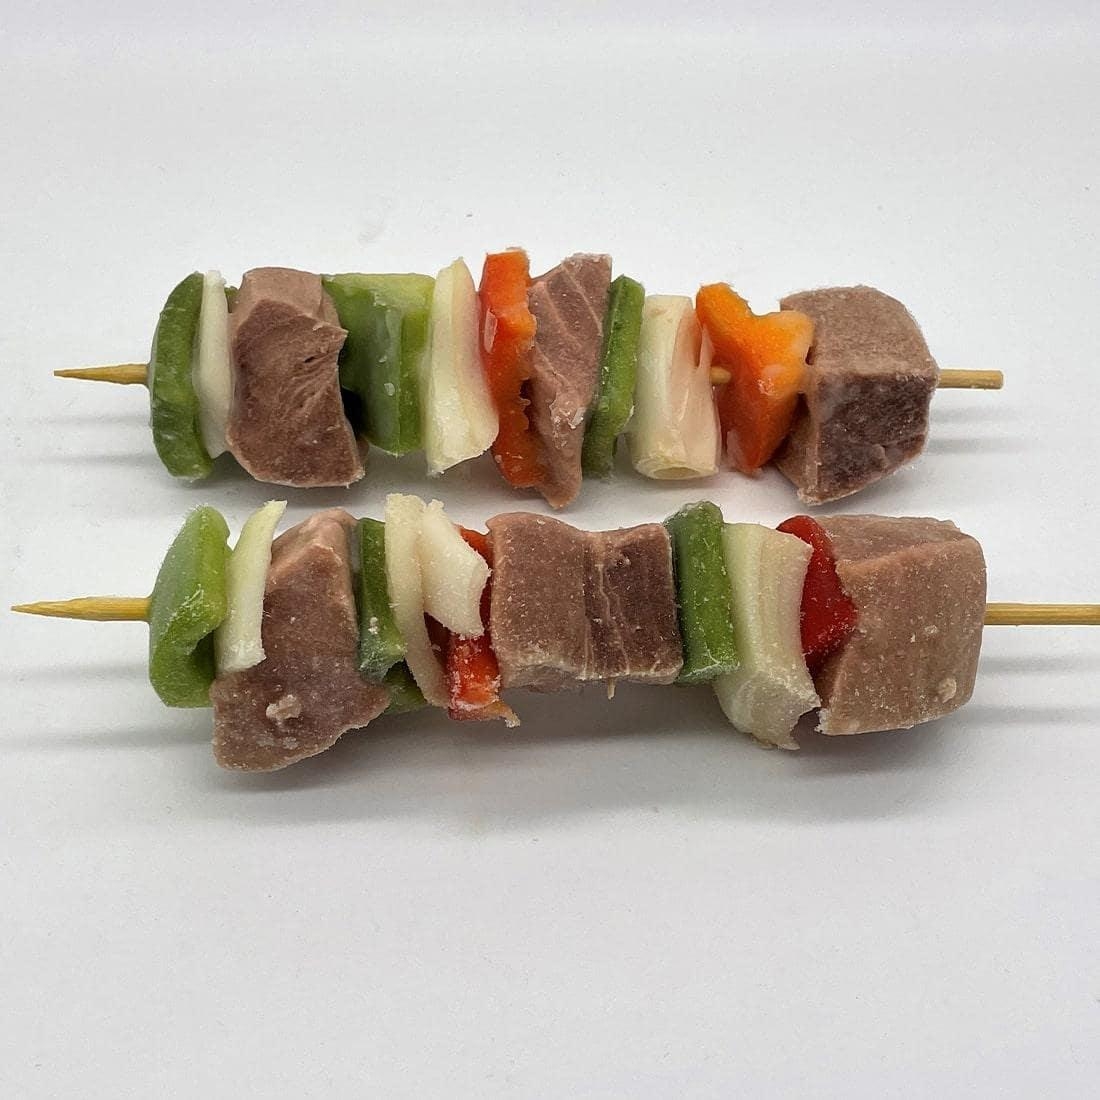 Tuna and Vegetable Skewers - Cover Image